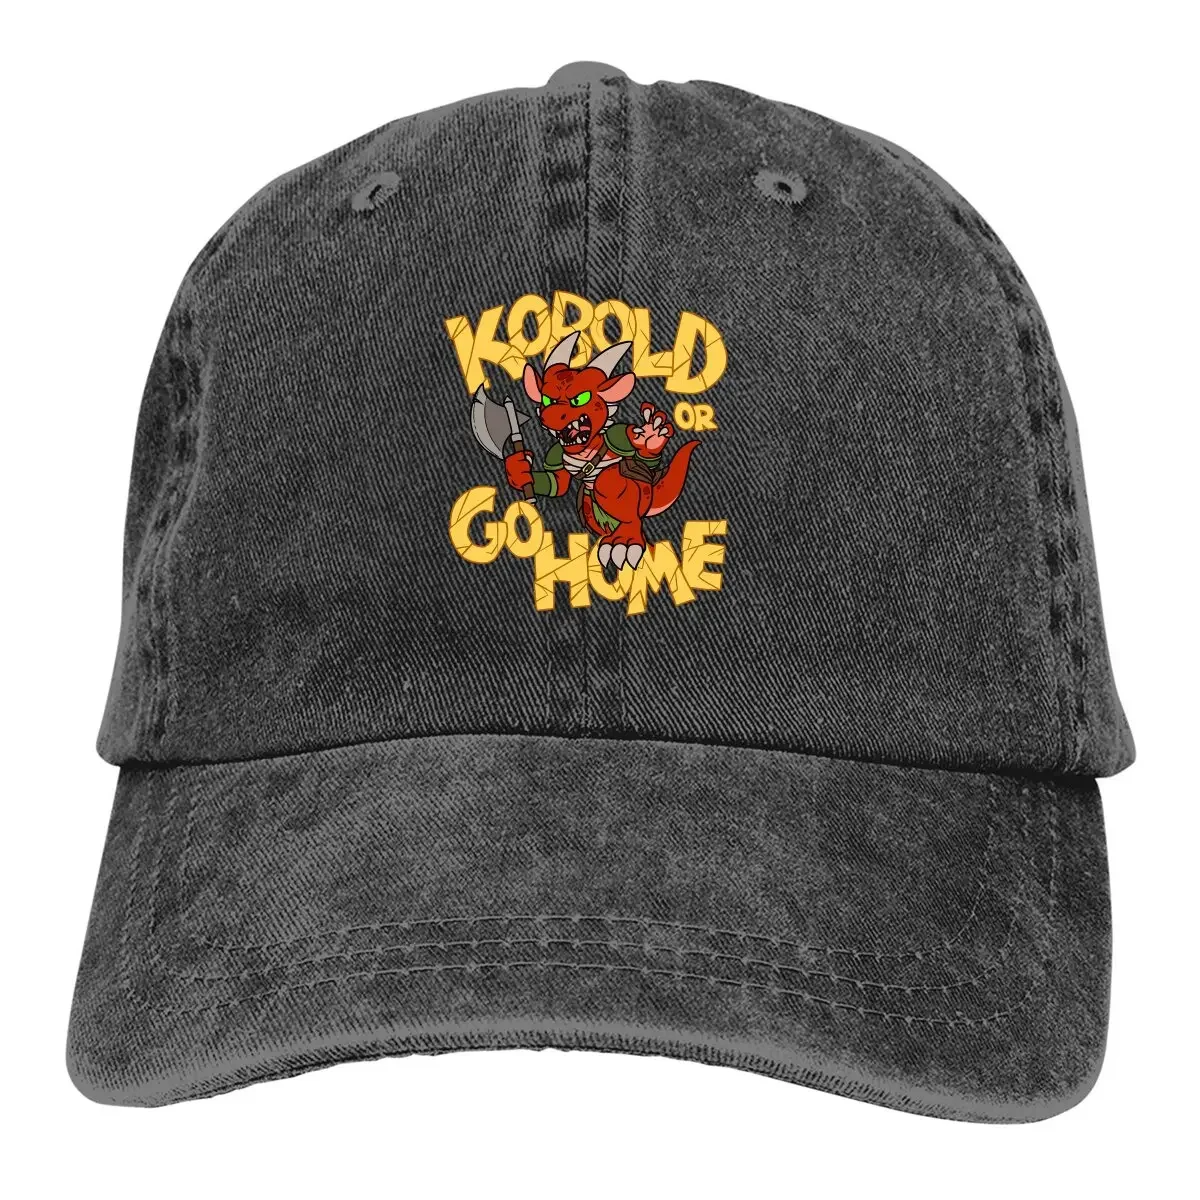 

Kobold or Go Home Baseball Caps Peaked Cap DnD Game Sun Shade Cowboy Hats for Men Trucker Dad Hat